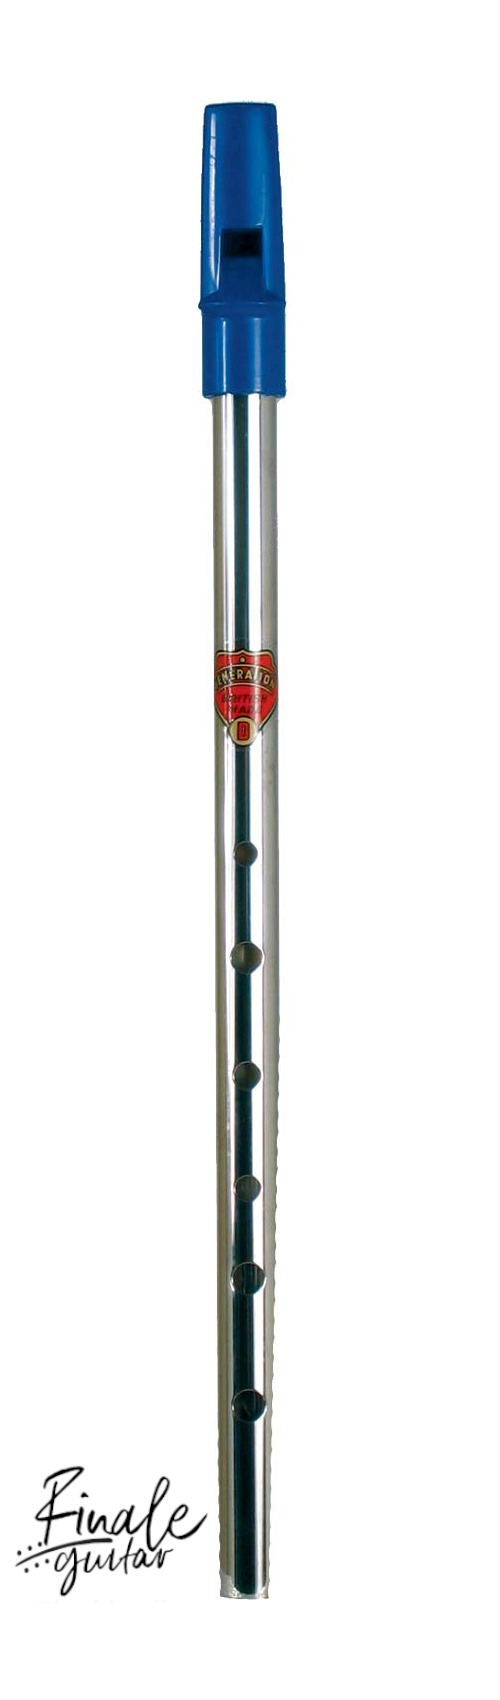 Generation nickel whistle in D G or C for sale in our online tin whistle shop